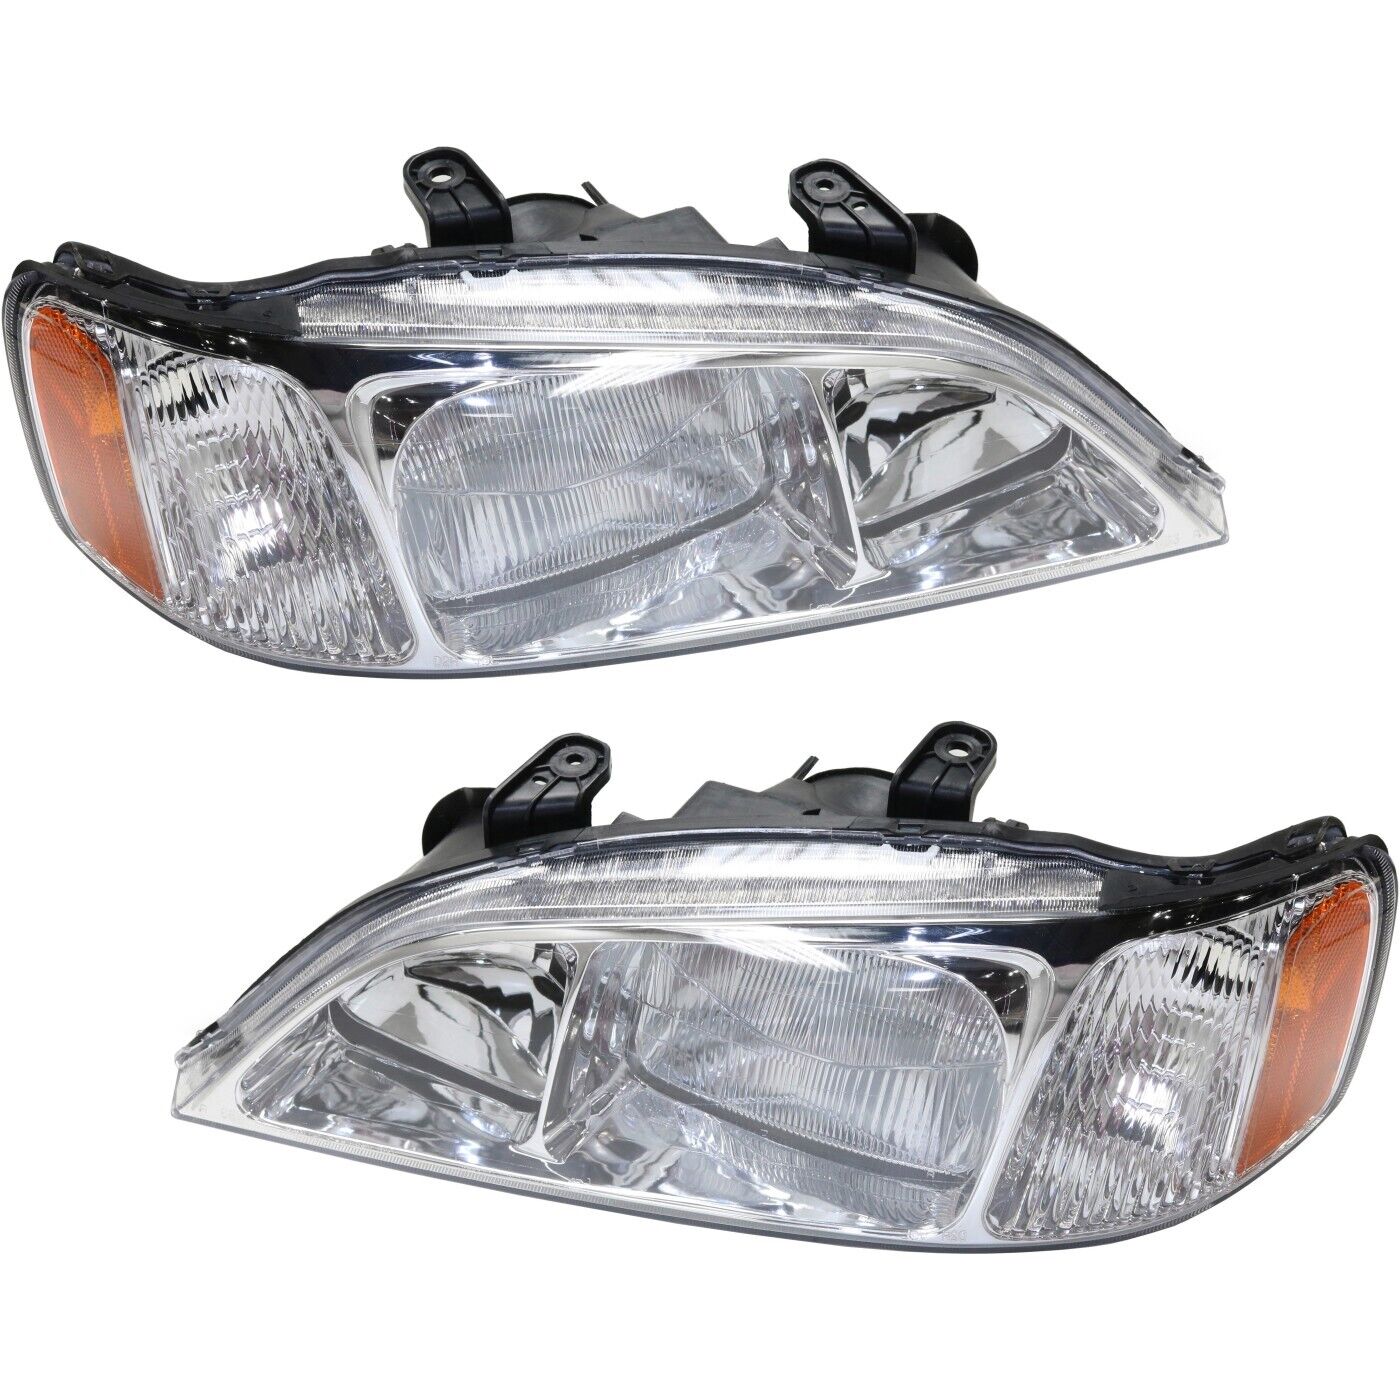 Headlights Headlamps Left & Right Pair Set NEW for 99-01 Acura TL